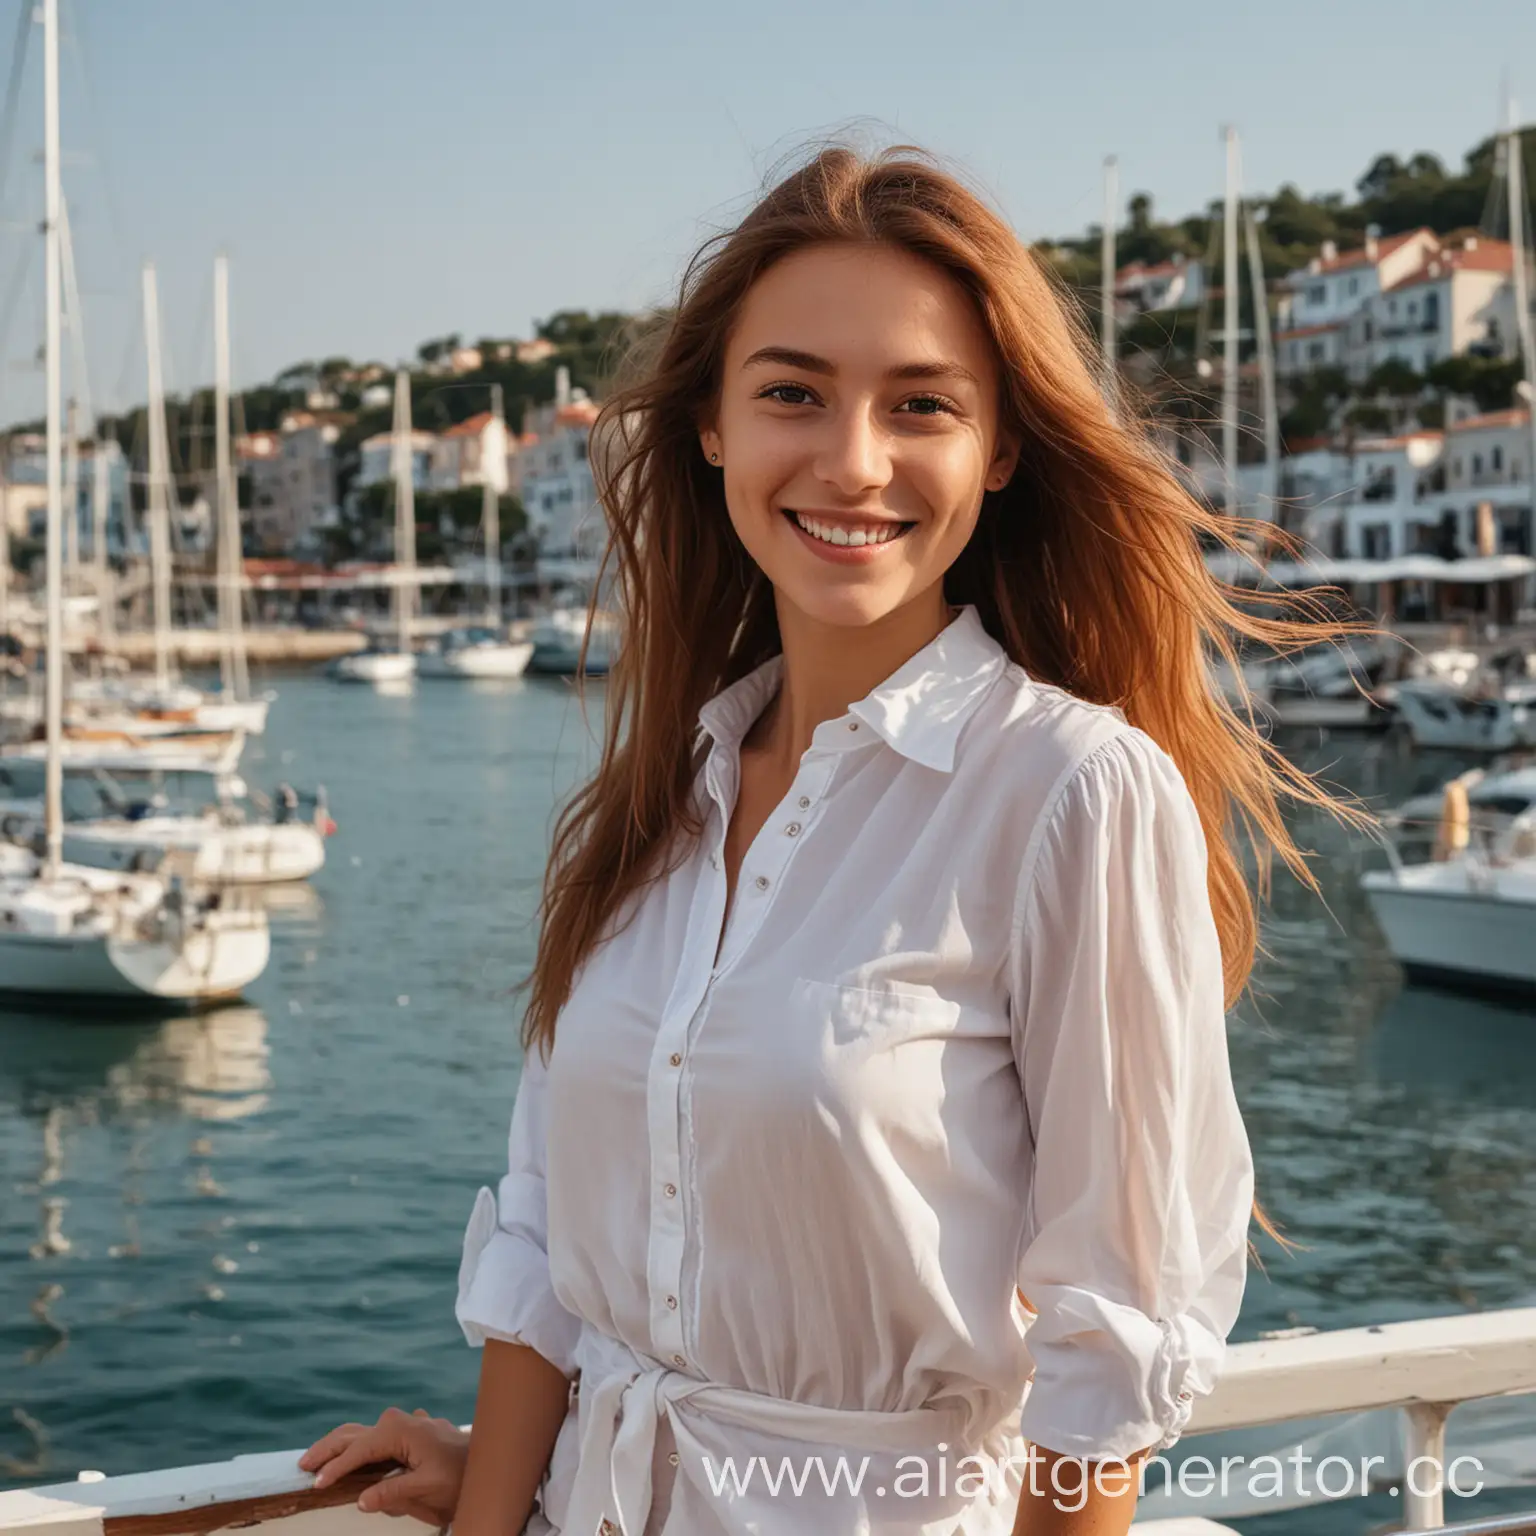 Smiling-Girl-in-White-Blouse-by-Calm-Marina-with-Yachts